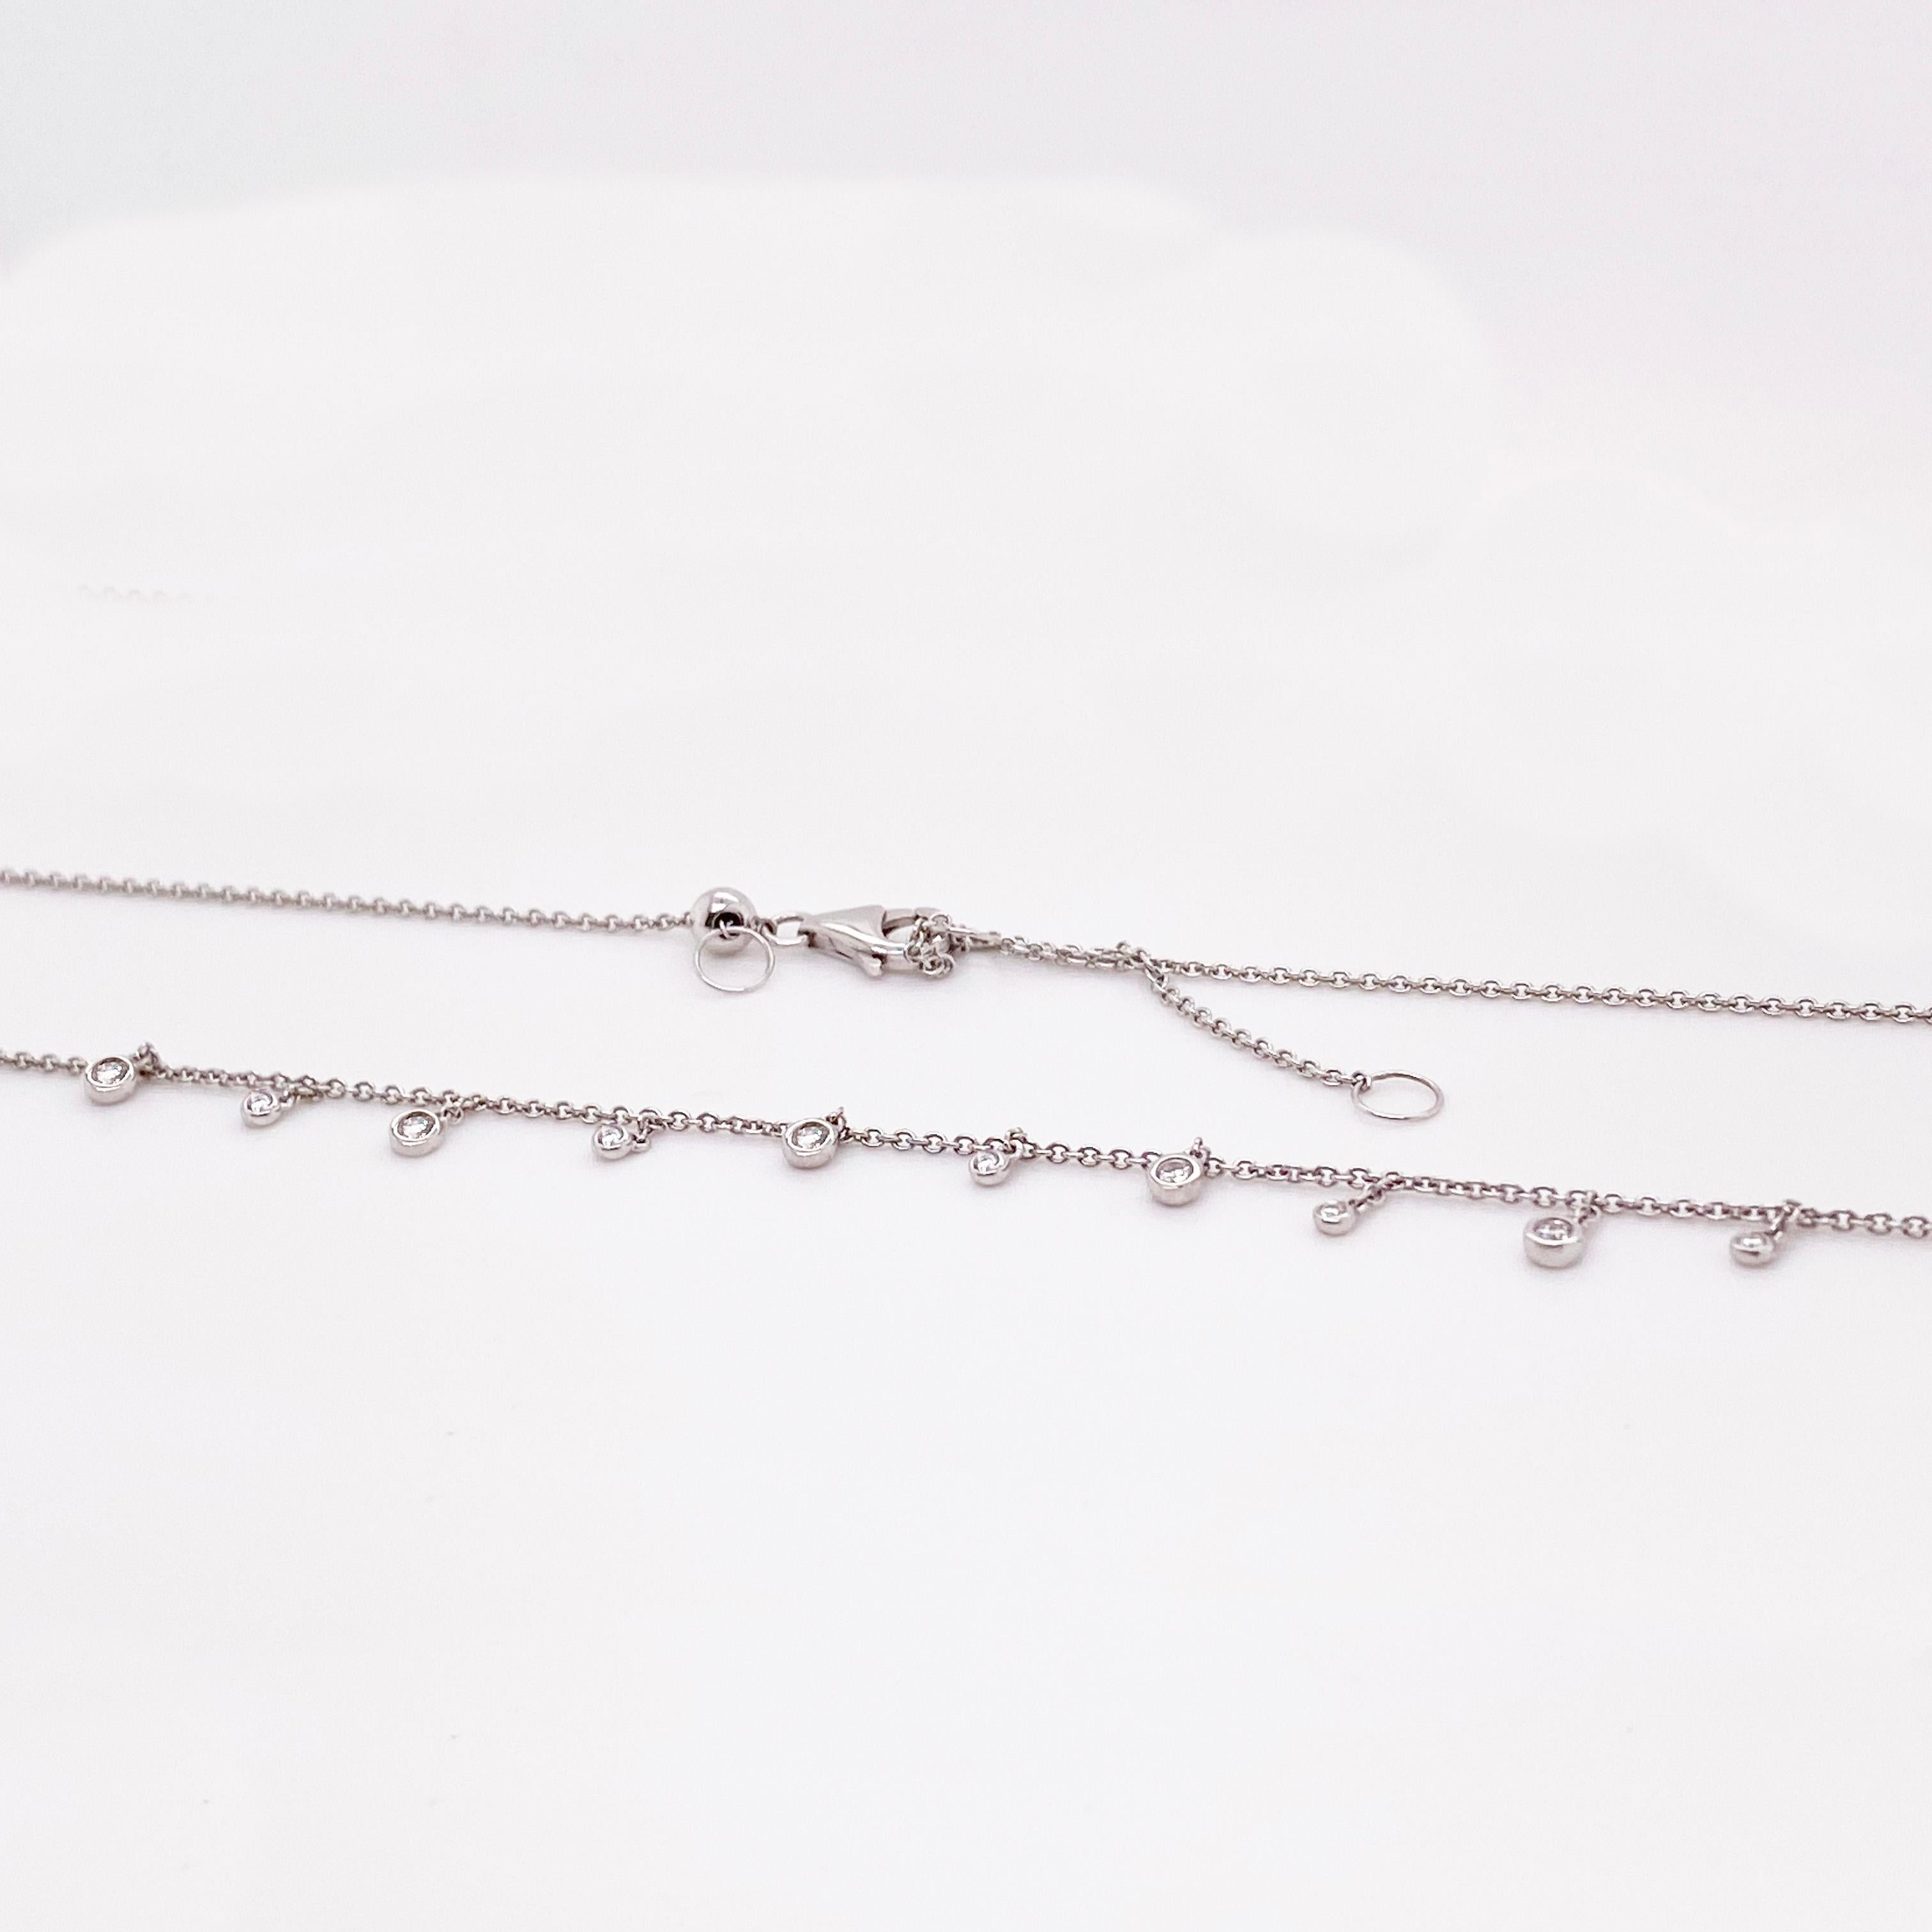 The diamond fringe necklace is adorable on anyone!  The 14 karat cable chain has 15 total diamonds that dangle and provide a fringe for the chain. This is the updated diamonds by the yard as the dangle diamonds is what many current designers are